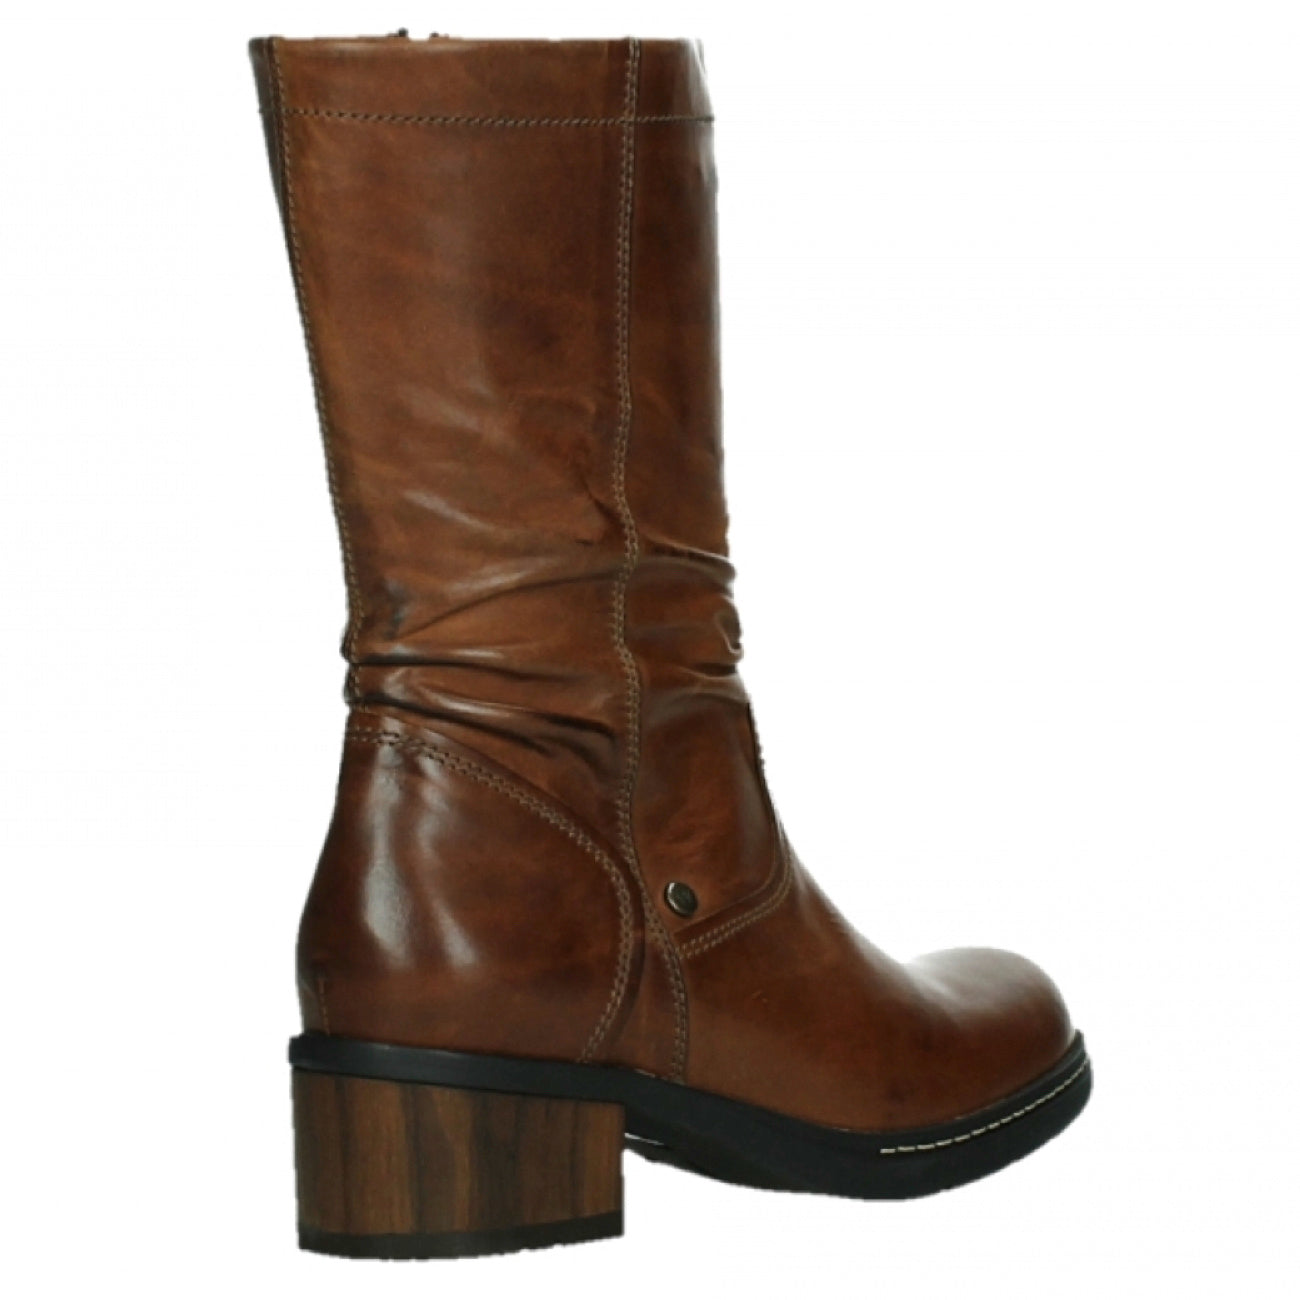 Wolky, Edmonton, Boots, Soft Wax Leather, Cognac Boots Wolky Cognac 37 